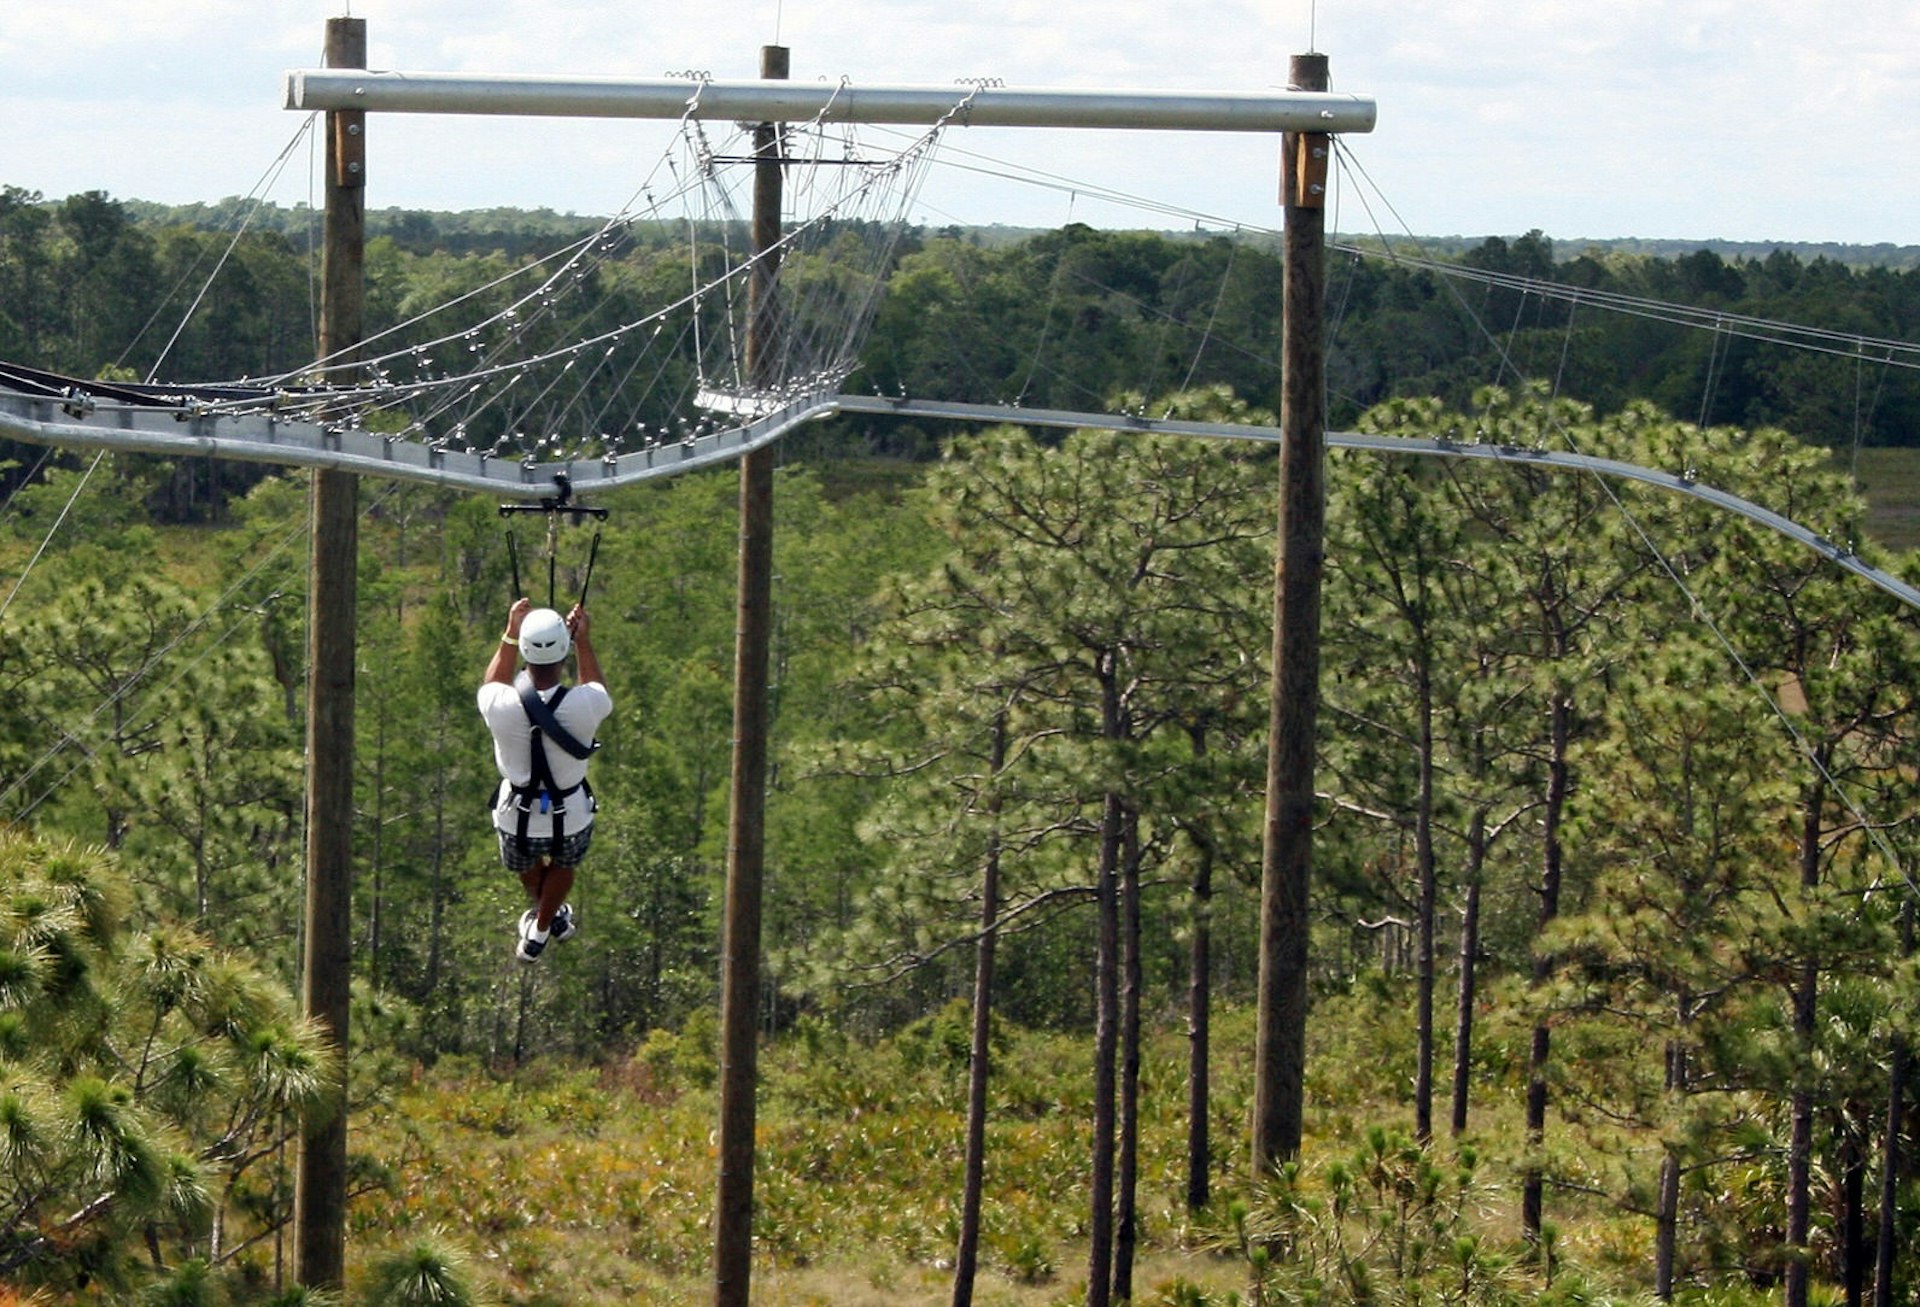 A first-time zip line rider is about to hit a curve on The Rattlesnake, which dips and twists and turns like a roller coaster, at Florida EcoSafaris at Forever Florida. (Marjie Lambert/Miami Herald/MCT via Getty Images)